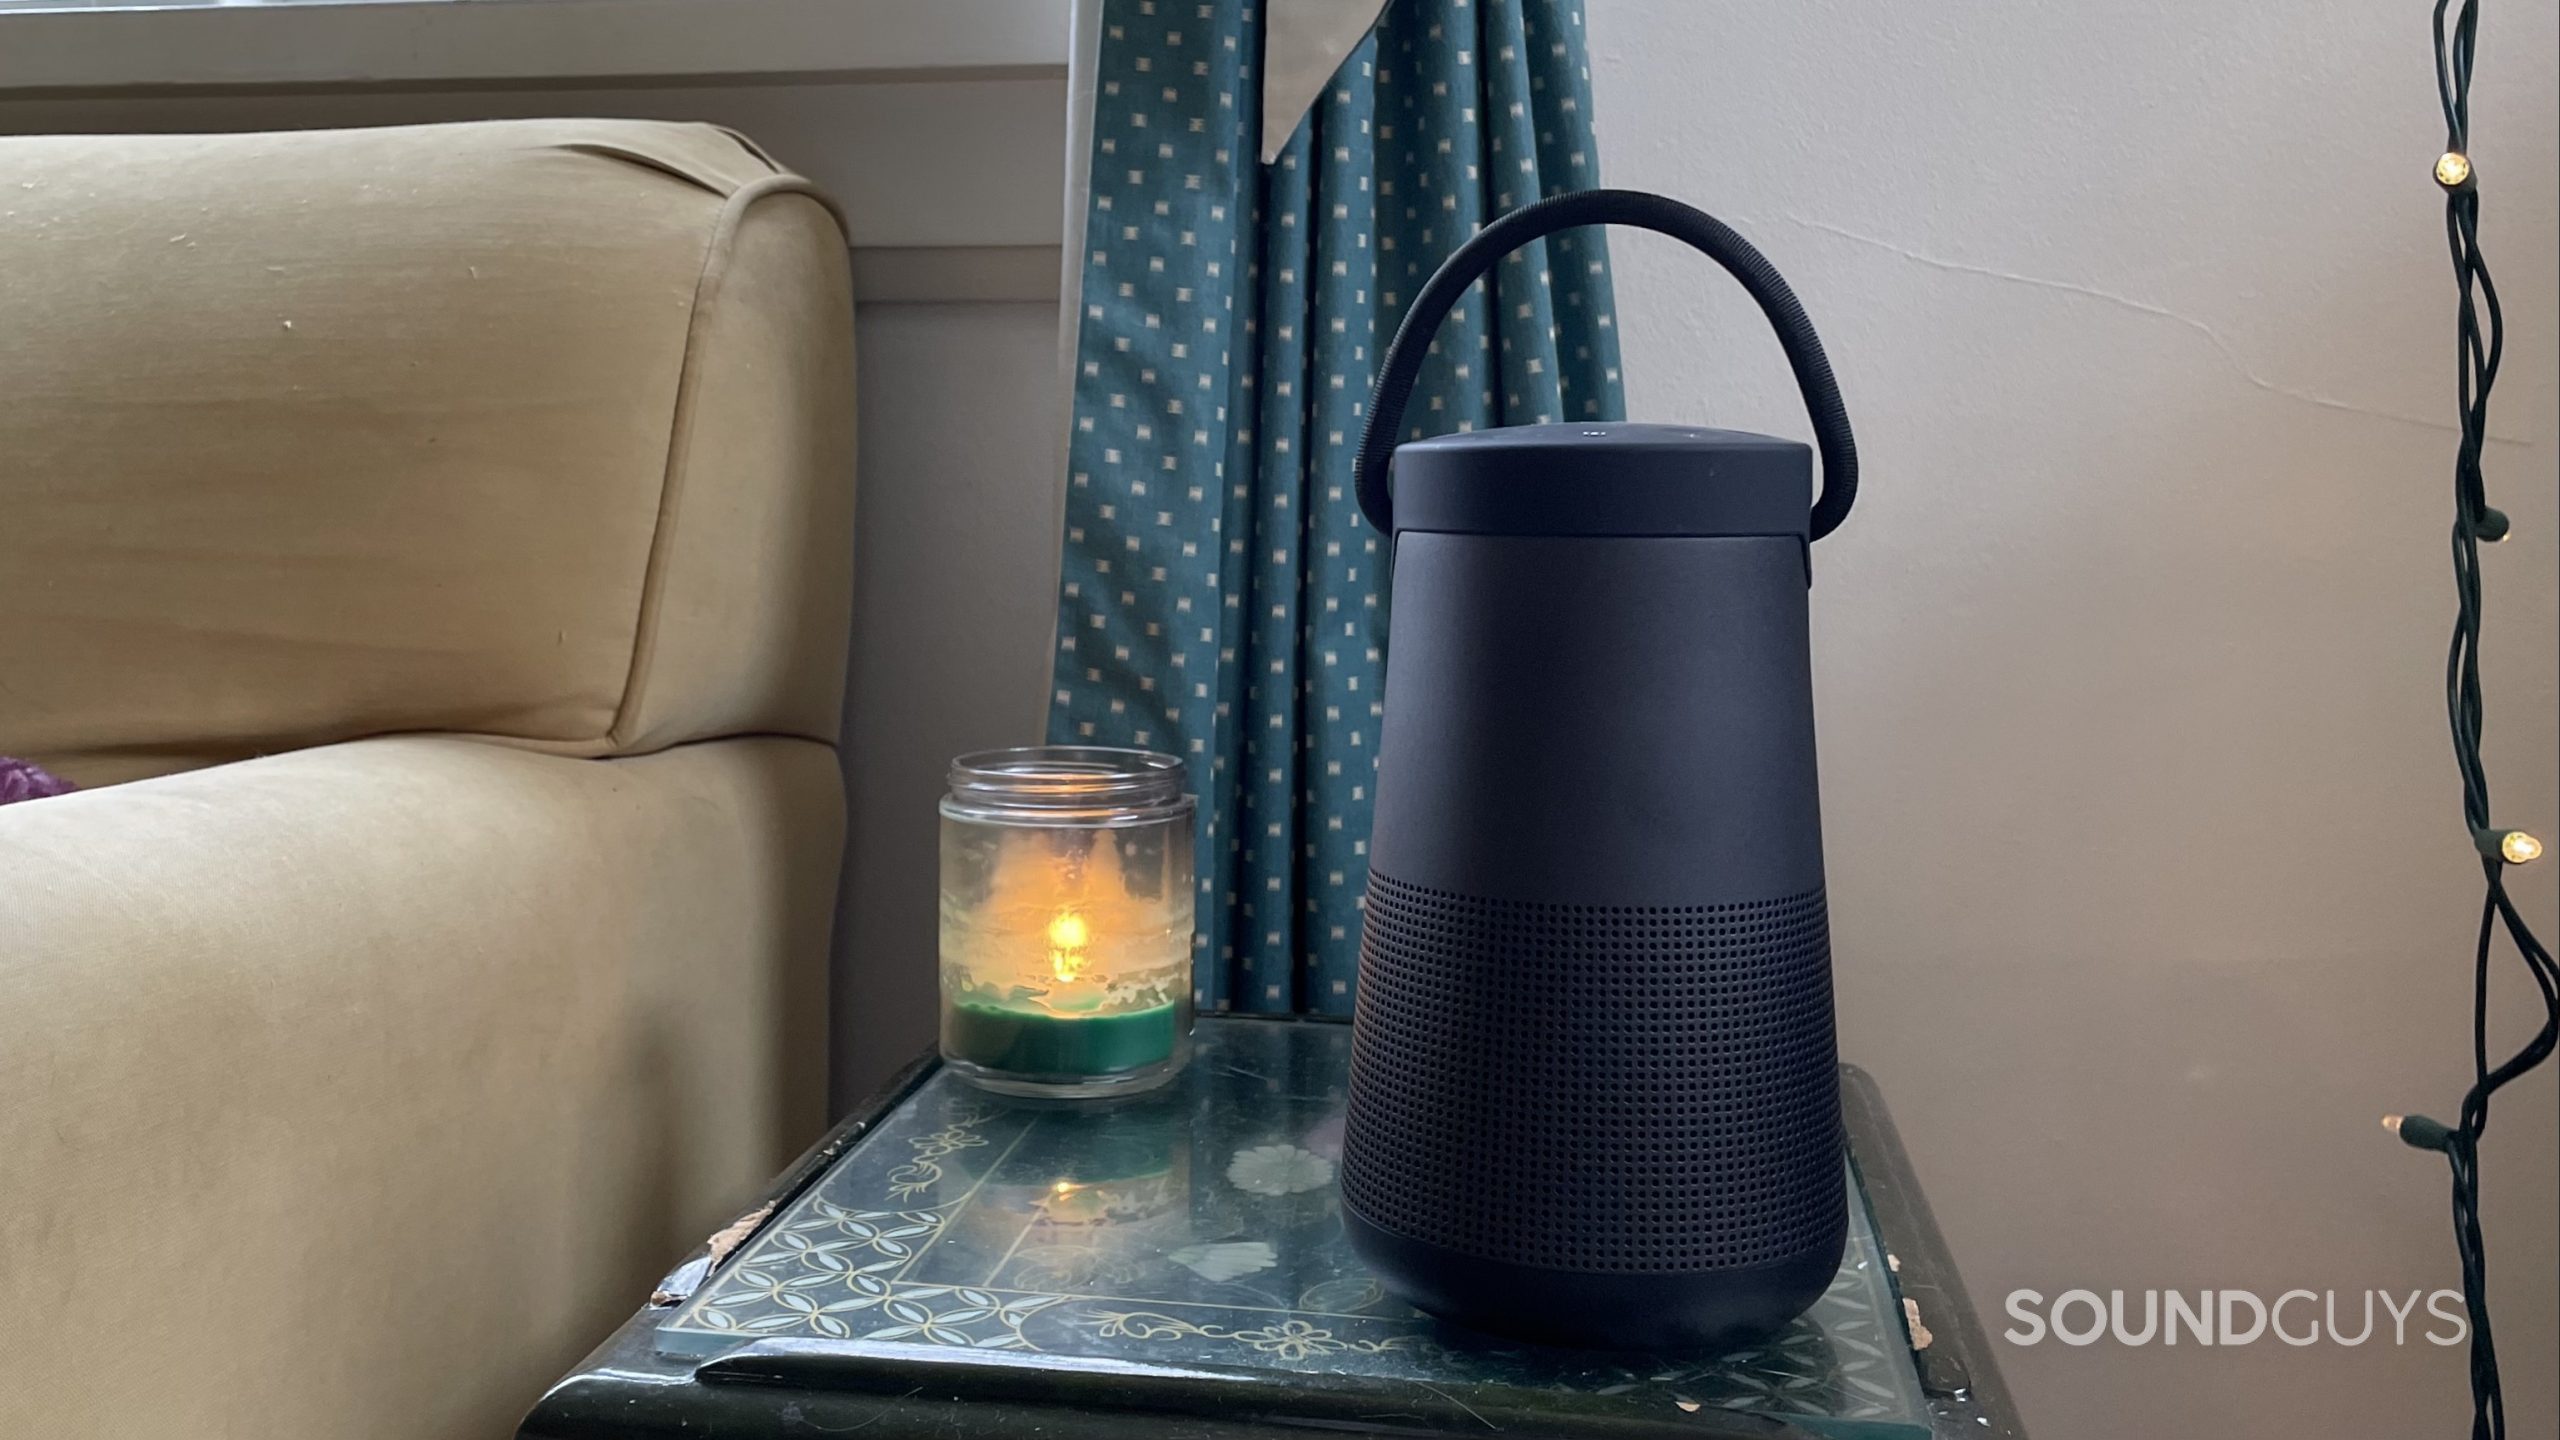 Bose SoundLink Revolve+ II review: A bit of everything